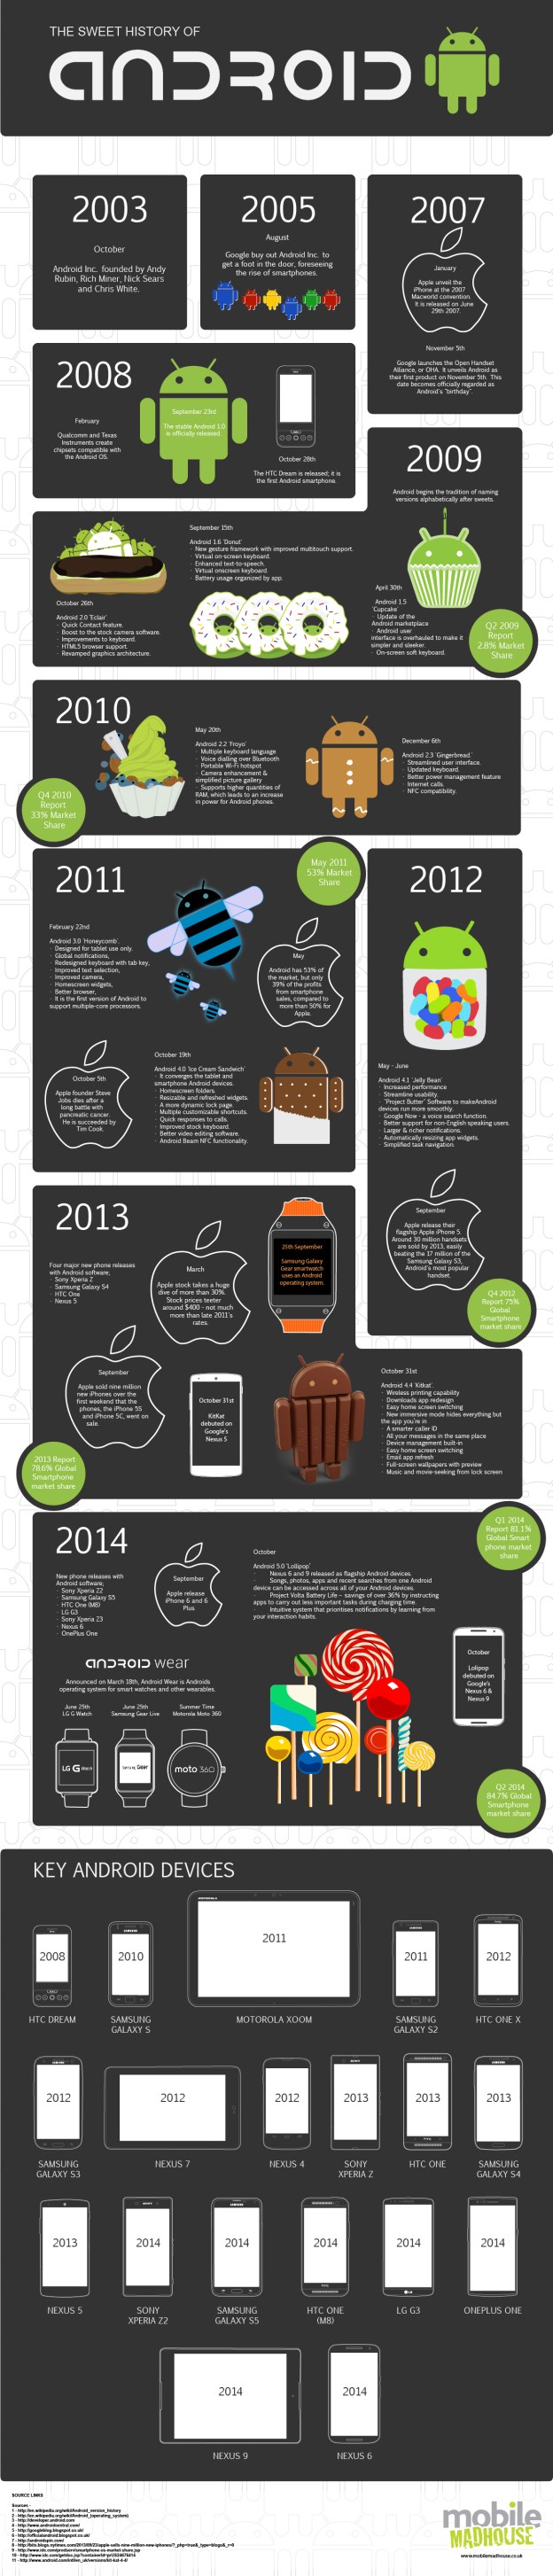 History of Android Infographic